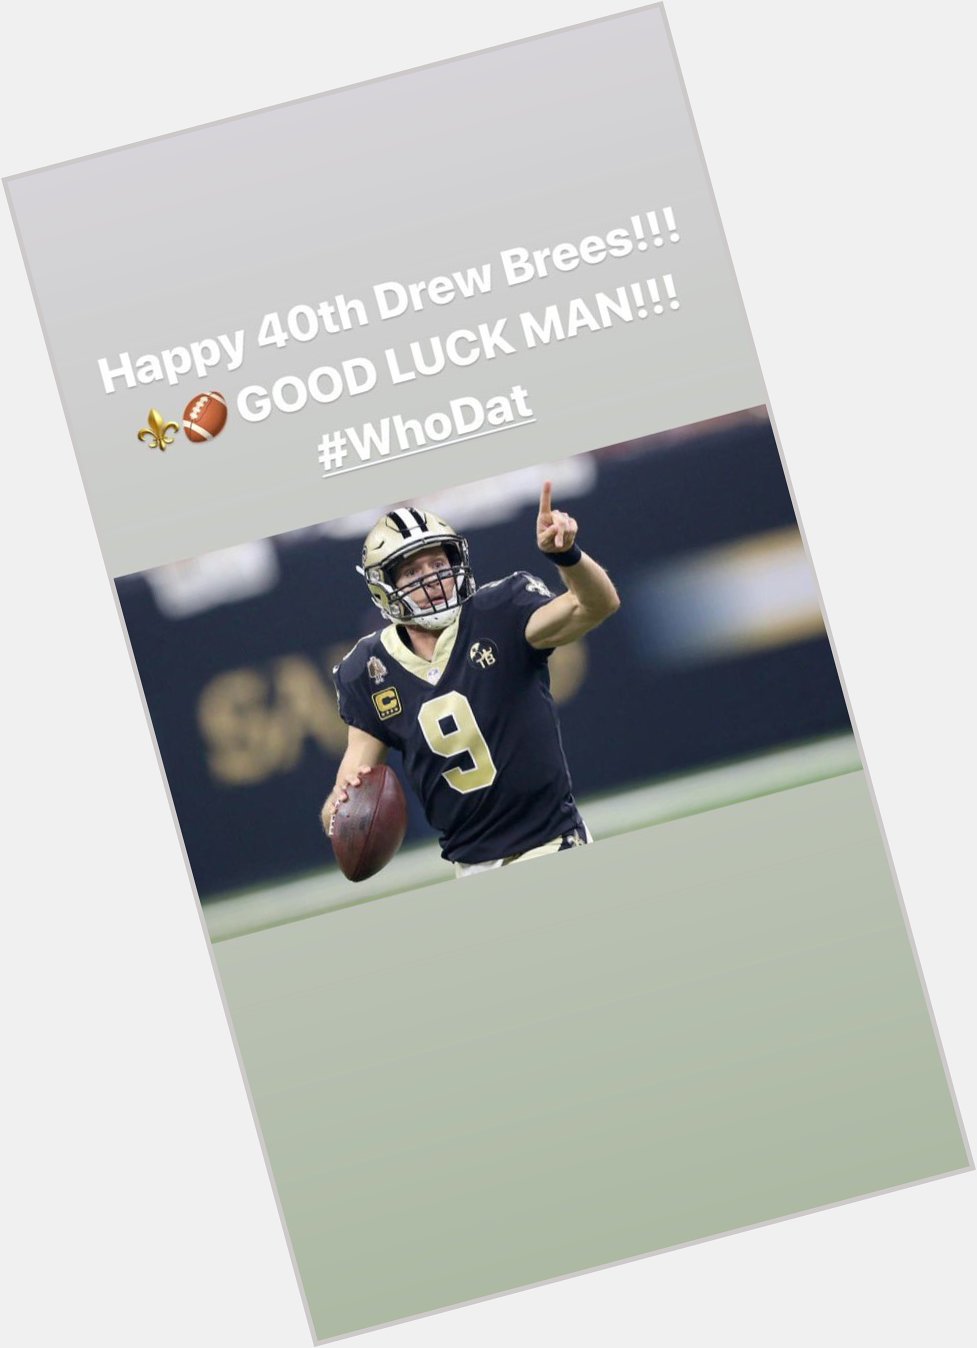 We all wish Drew Brees a Happy 40th Birthday WHO DAT?!   LETS GO !! 